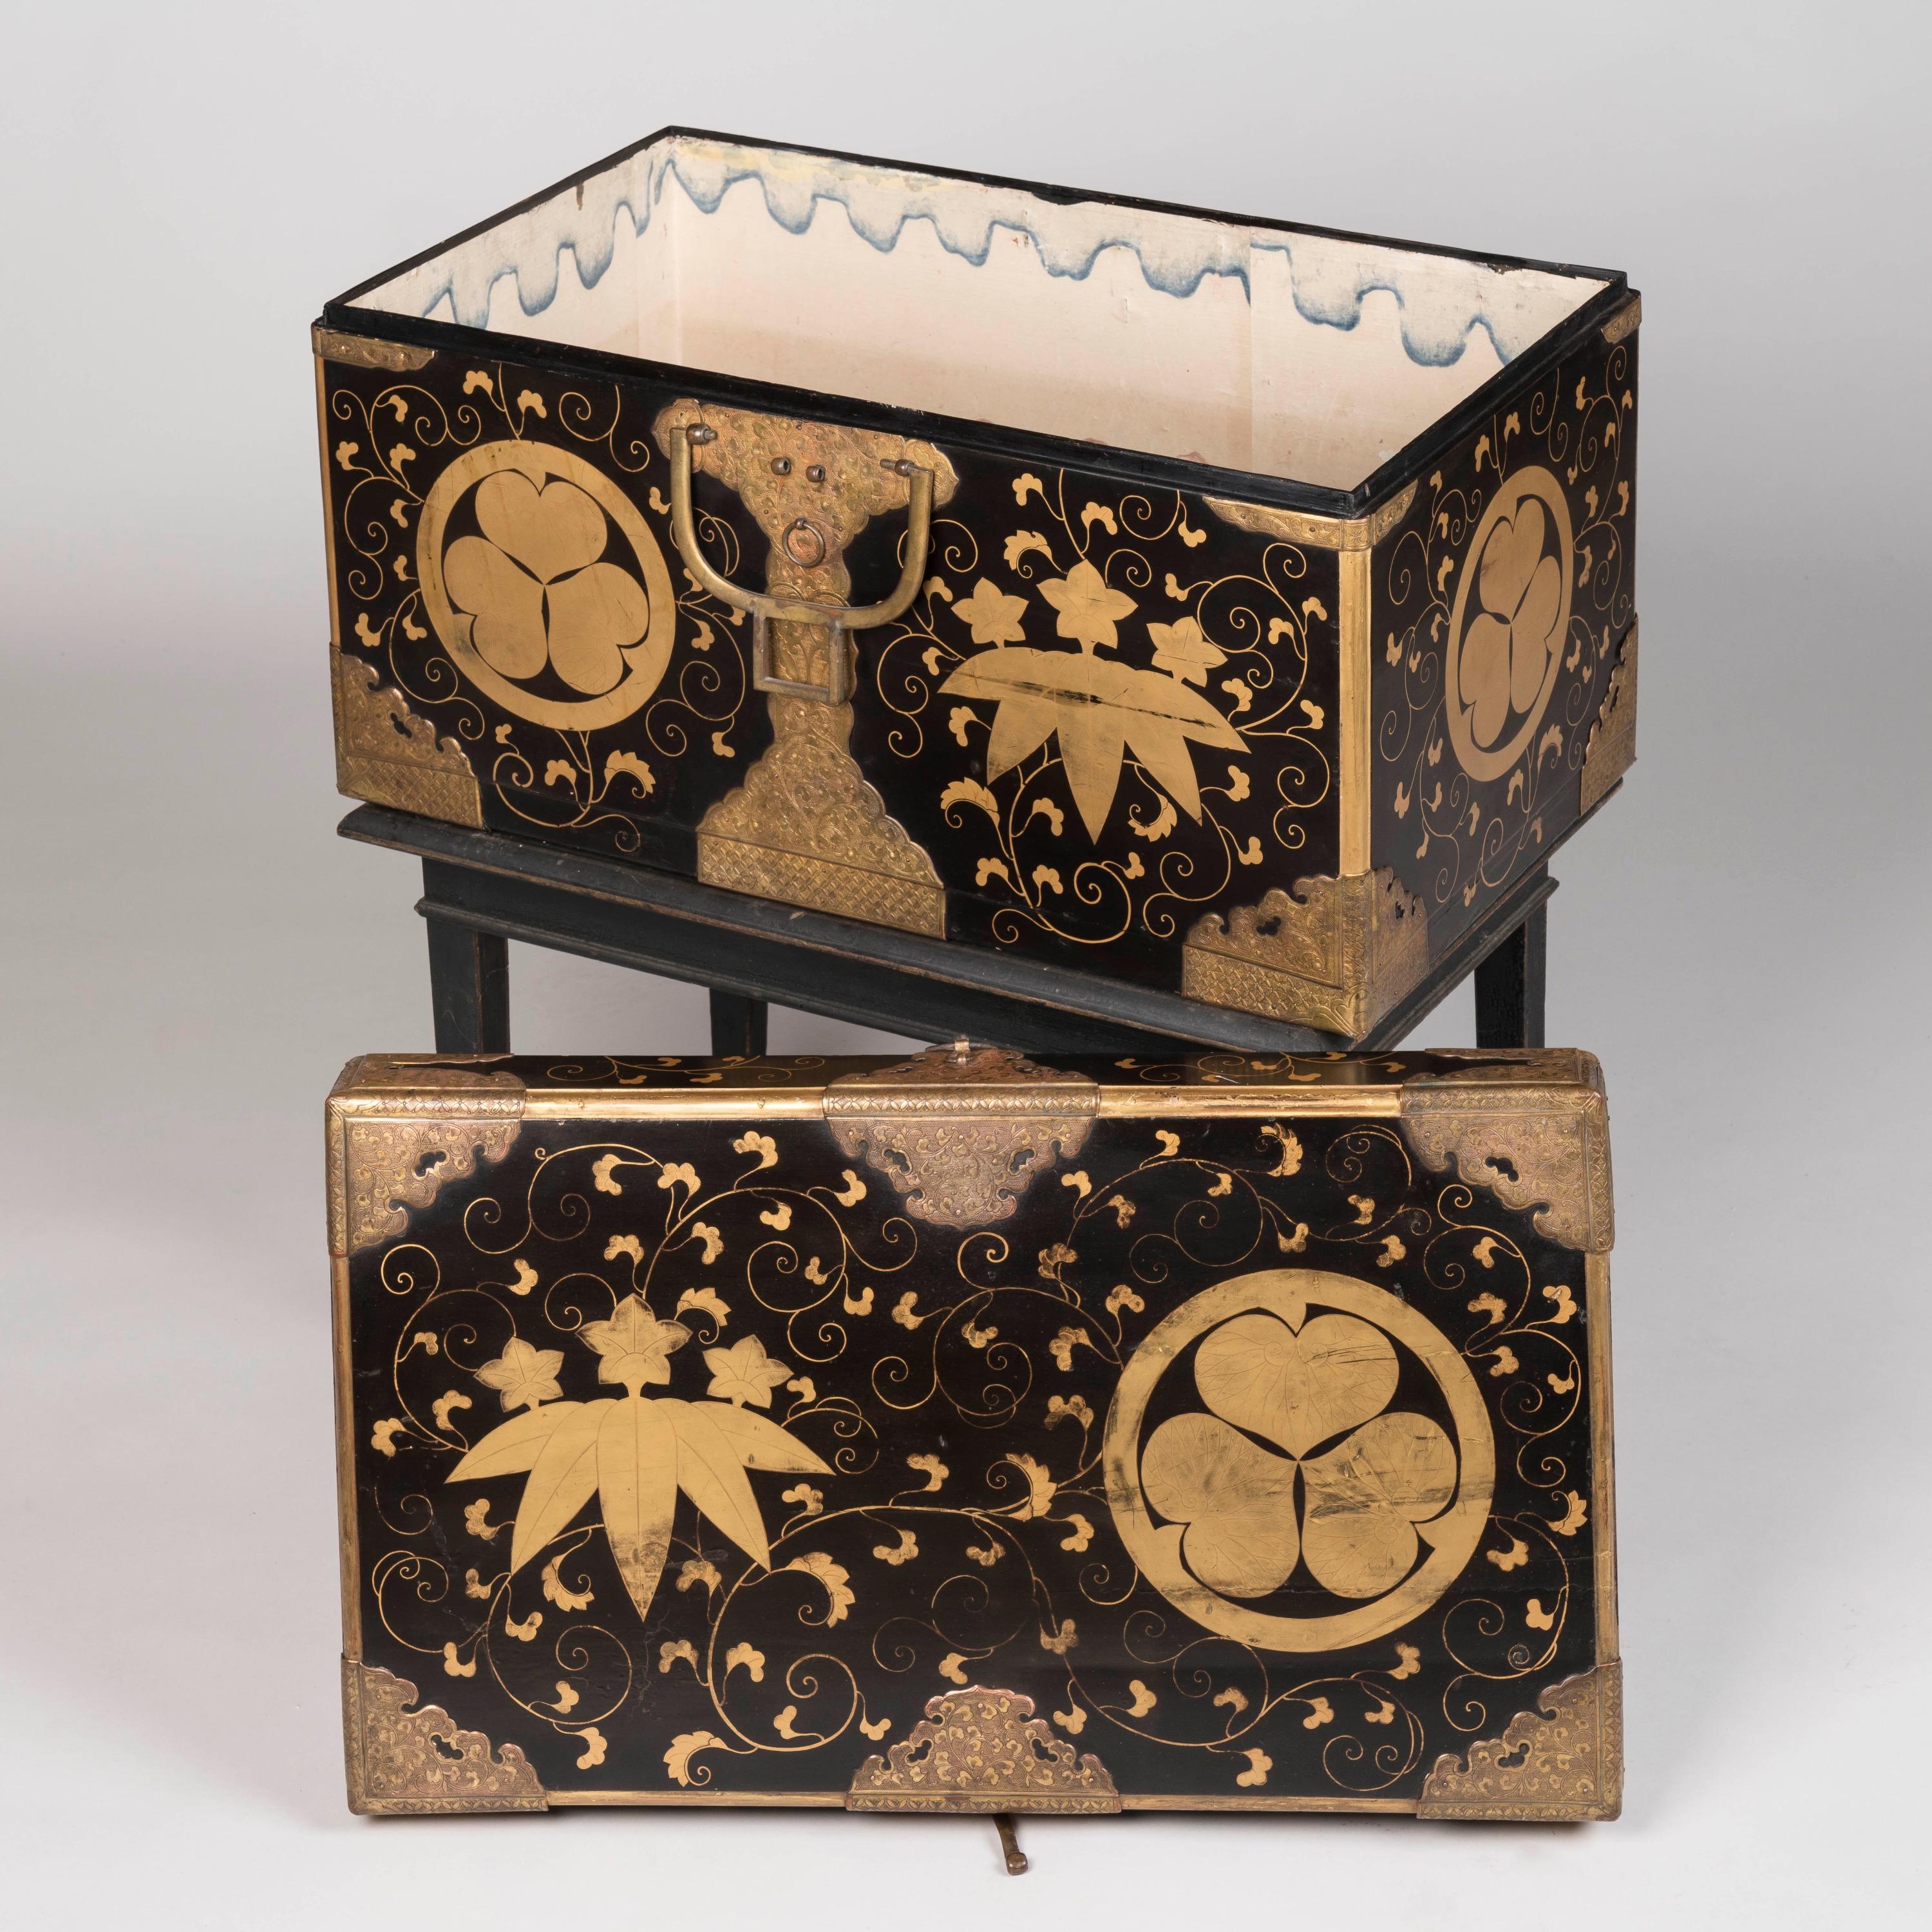 19th Century Japanese Edo Period Black & Gold 'Nagamochi' Dowry Trunk with Family Crests For Sale